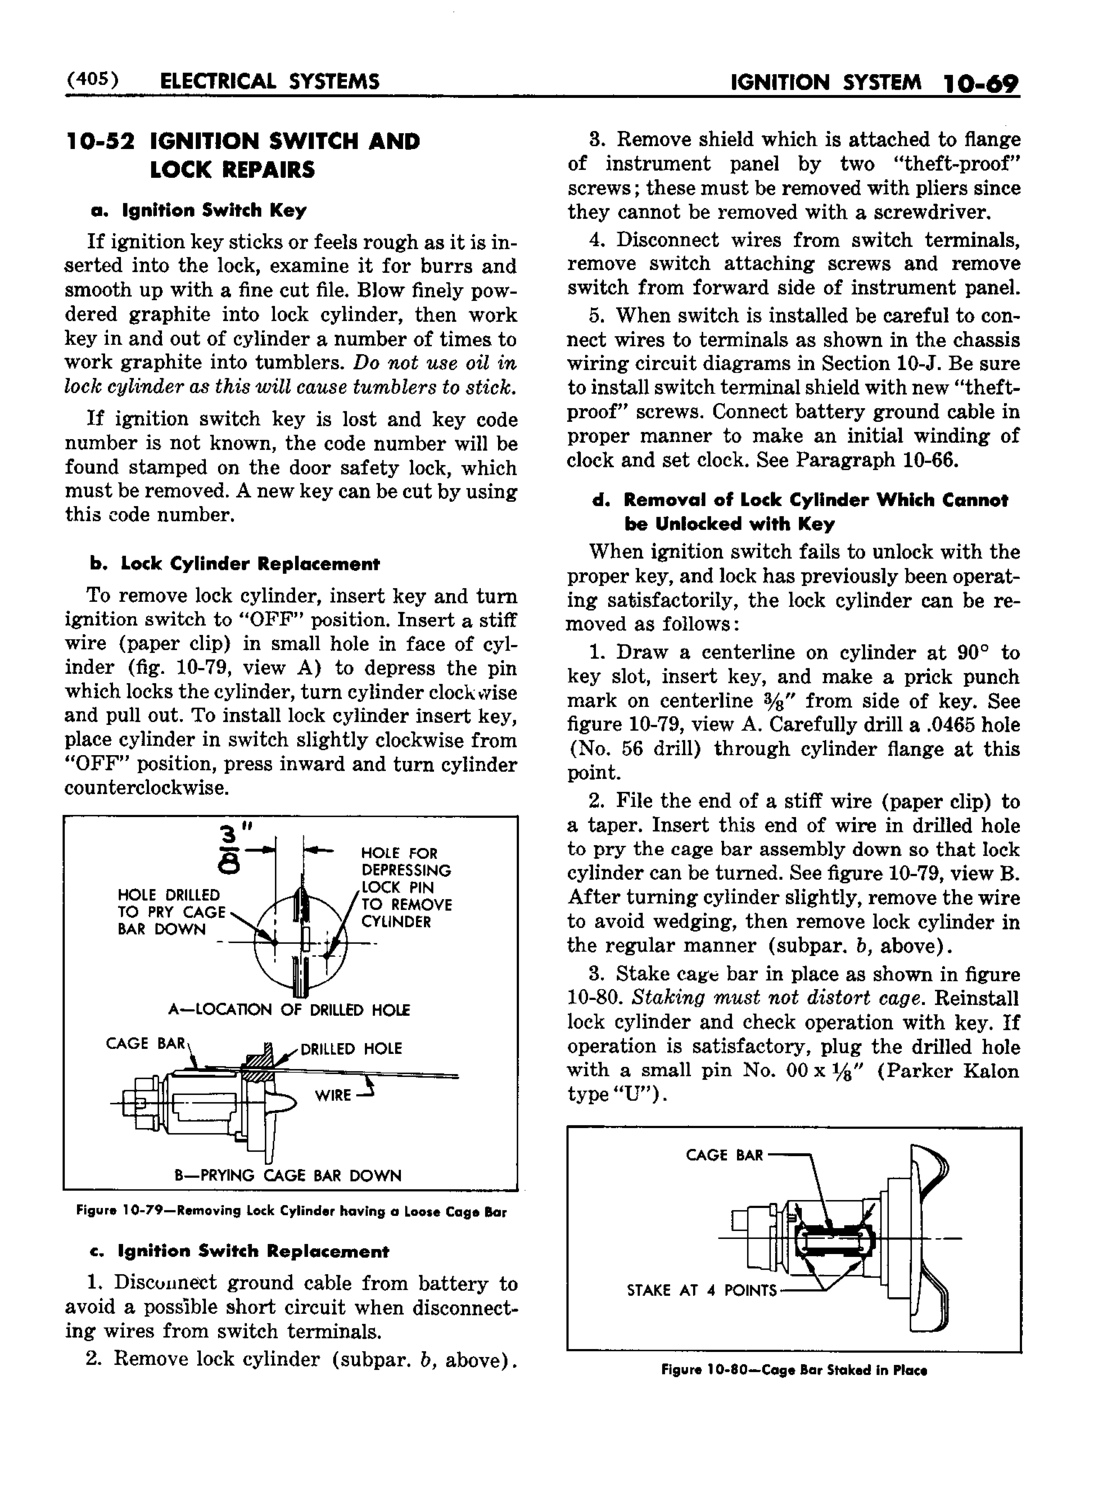 n_11 1952 Buick Shop Manual - Electrical Systems-069-069.jpg